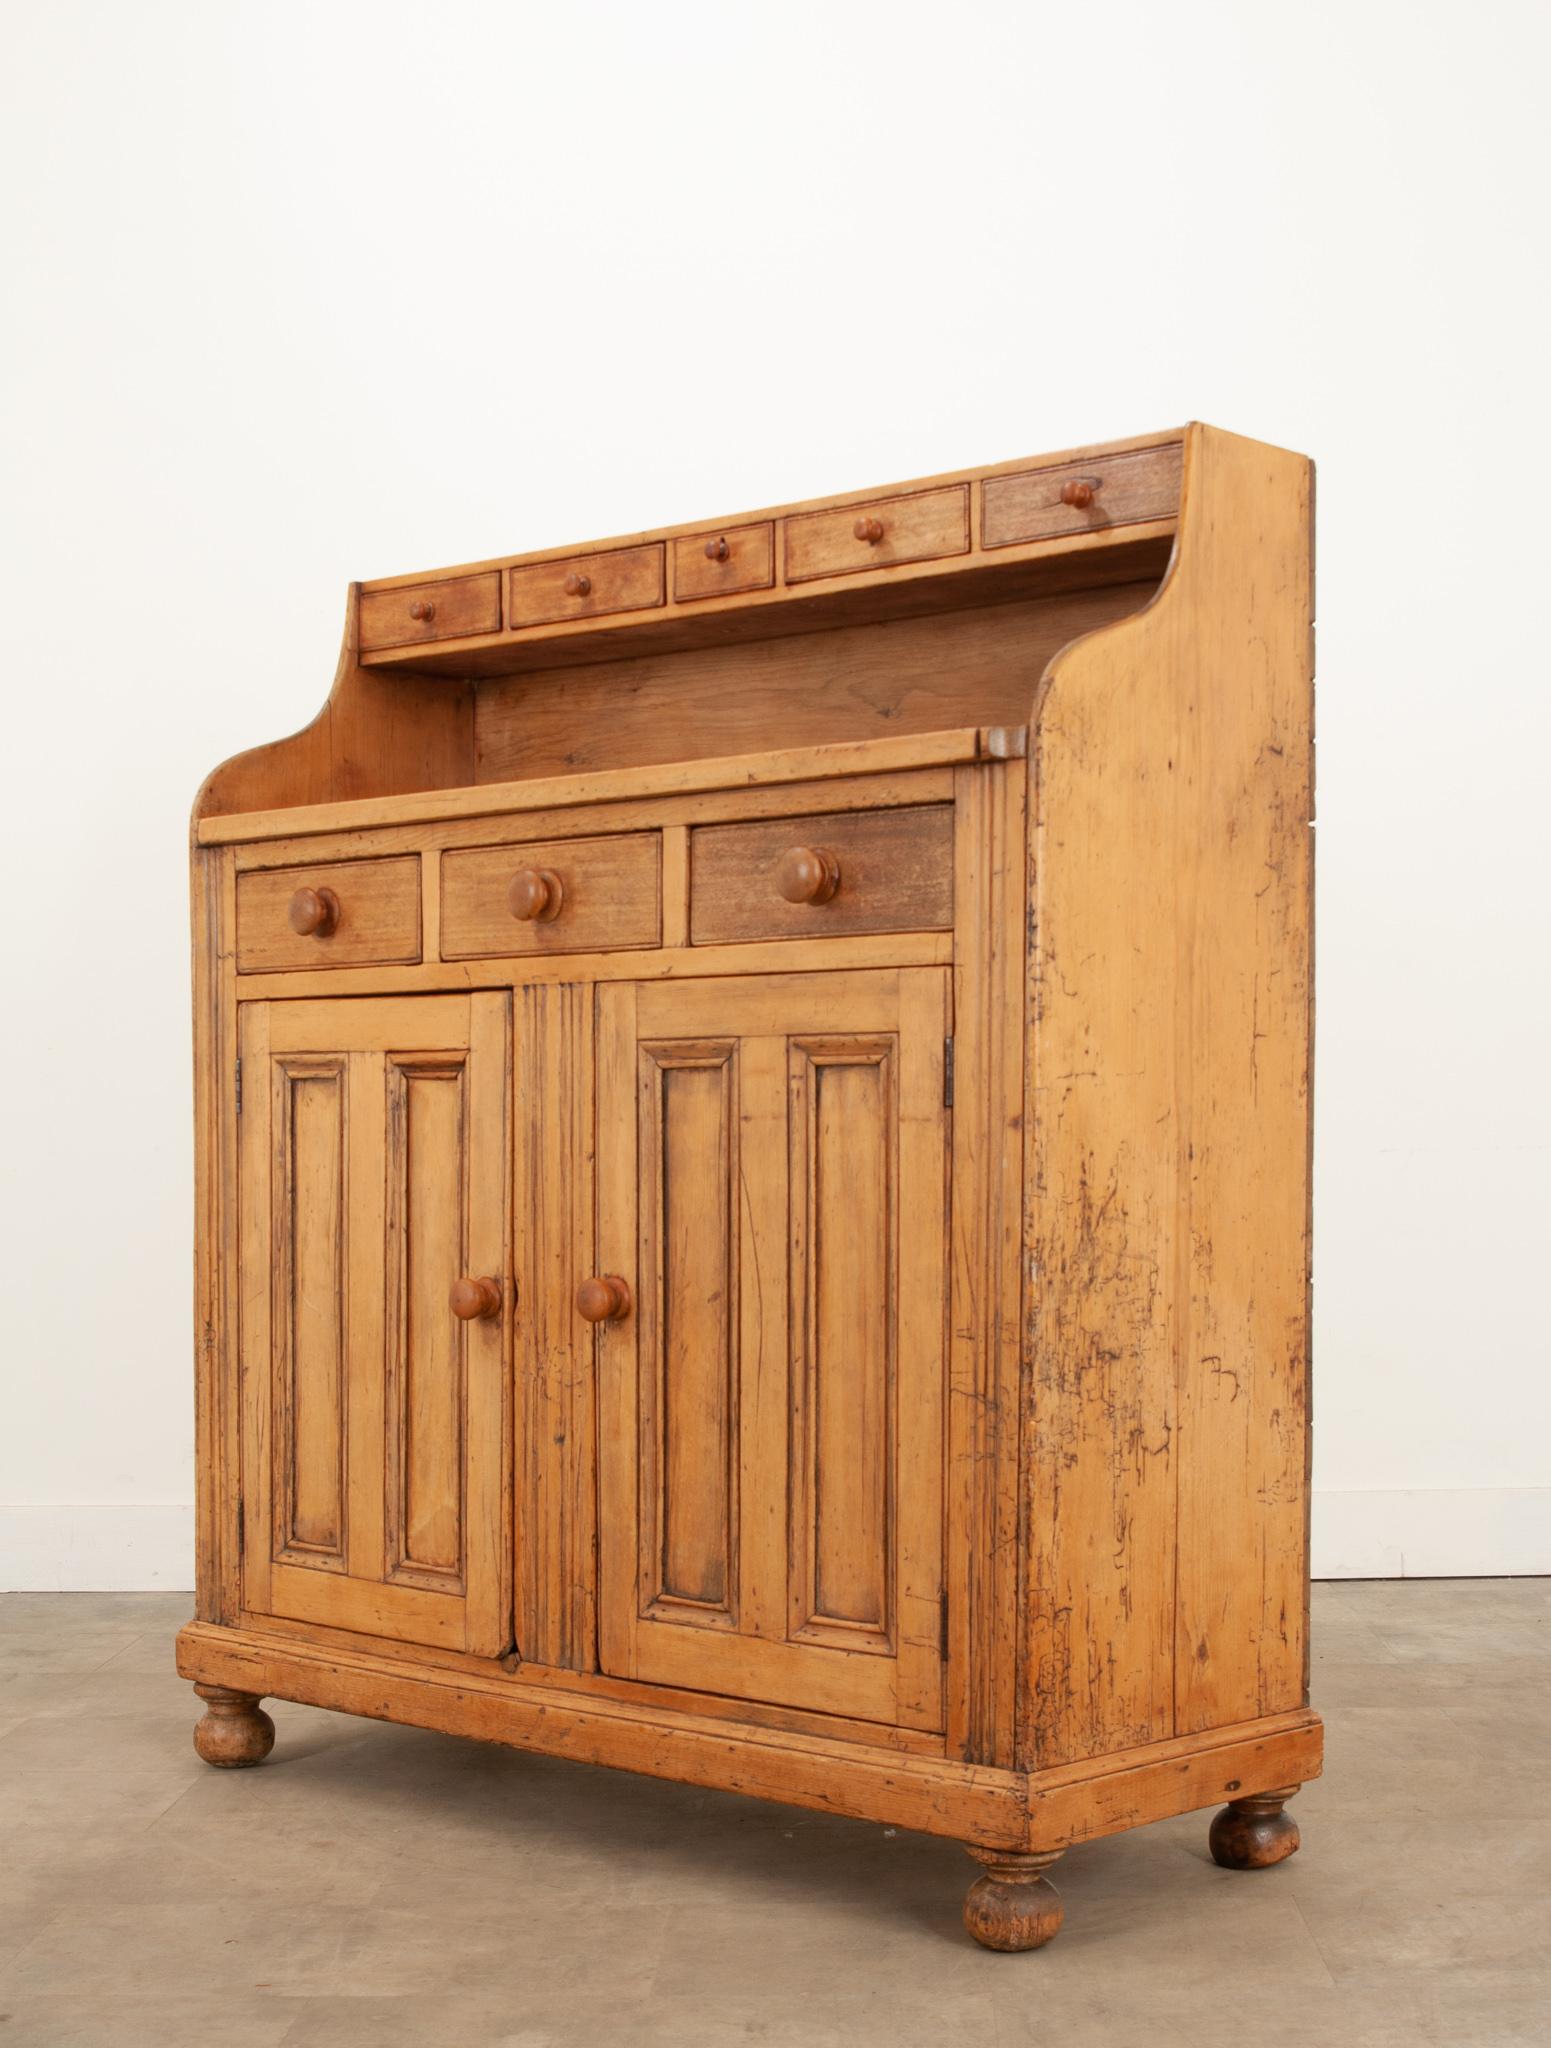 This delightful English pine dresser was made circa 1840 and is brimming with country charm. The warm tones found within the antique pine are absolutely beautiful and naturally comforting. The English pine has accumulated a patination that is second